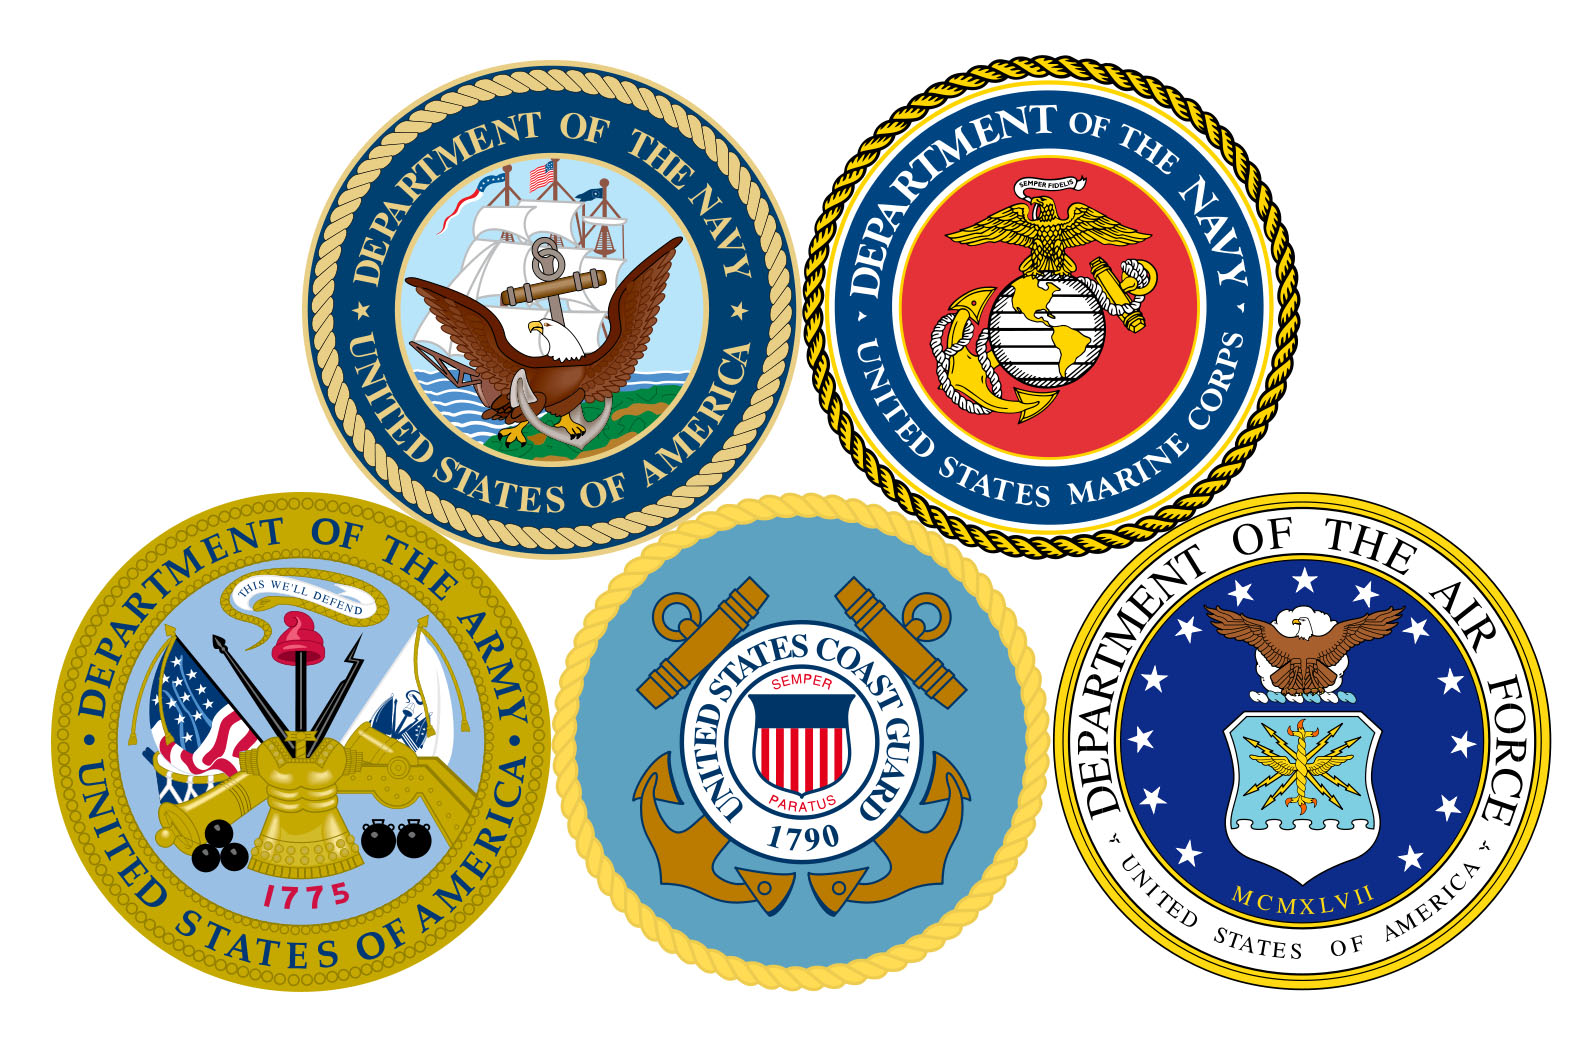 us army clipart military branch